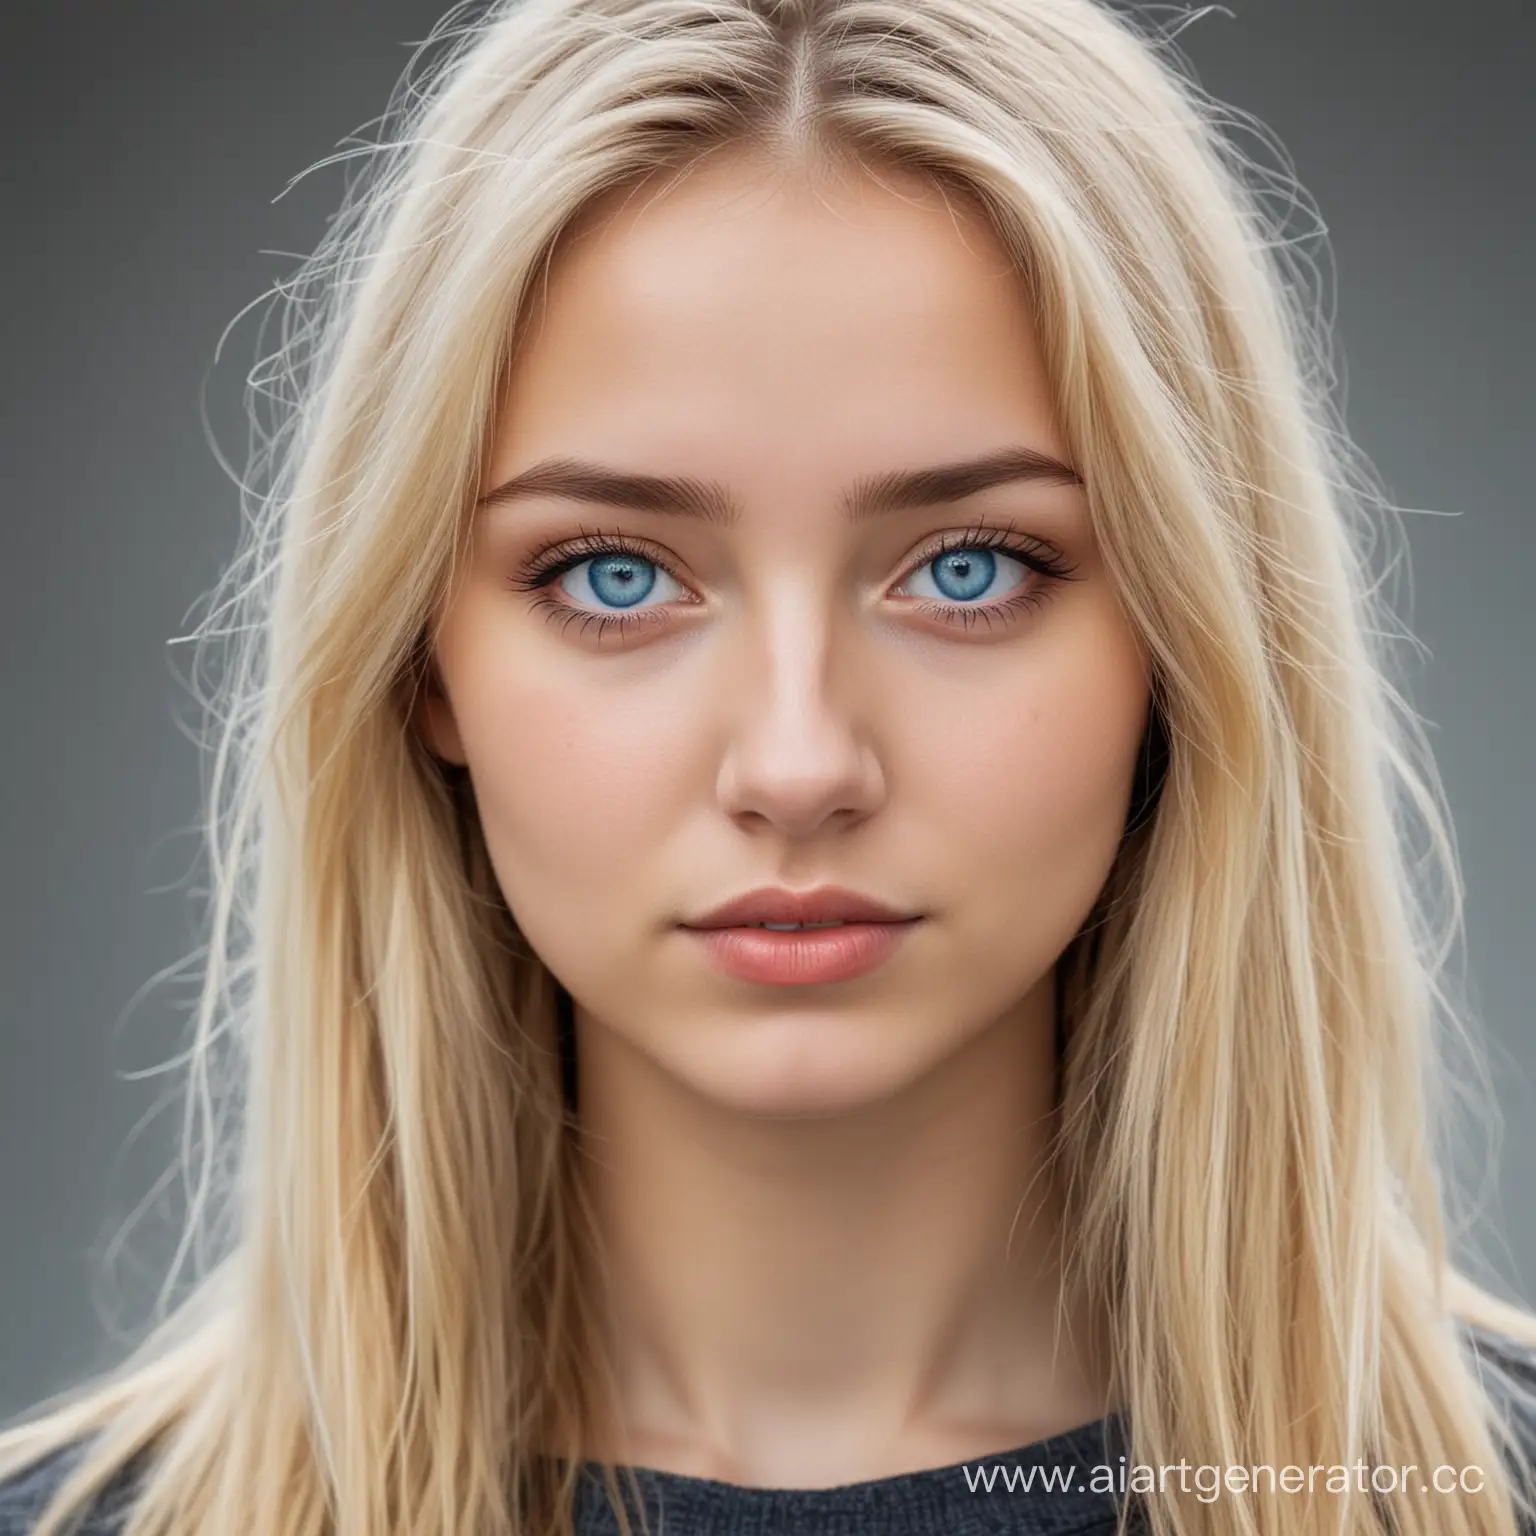 Portrait-of-Activist-Journalist-Belarusian-Student-with-Light-Hair-and-Blue-Eyes